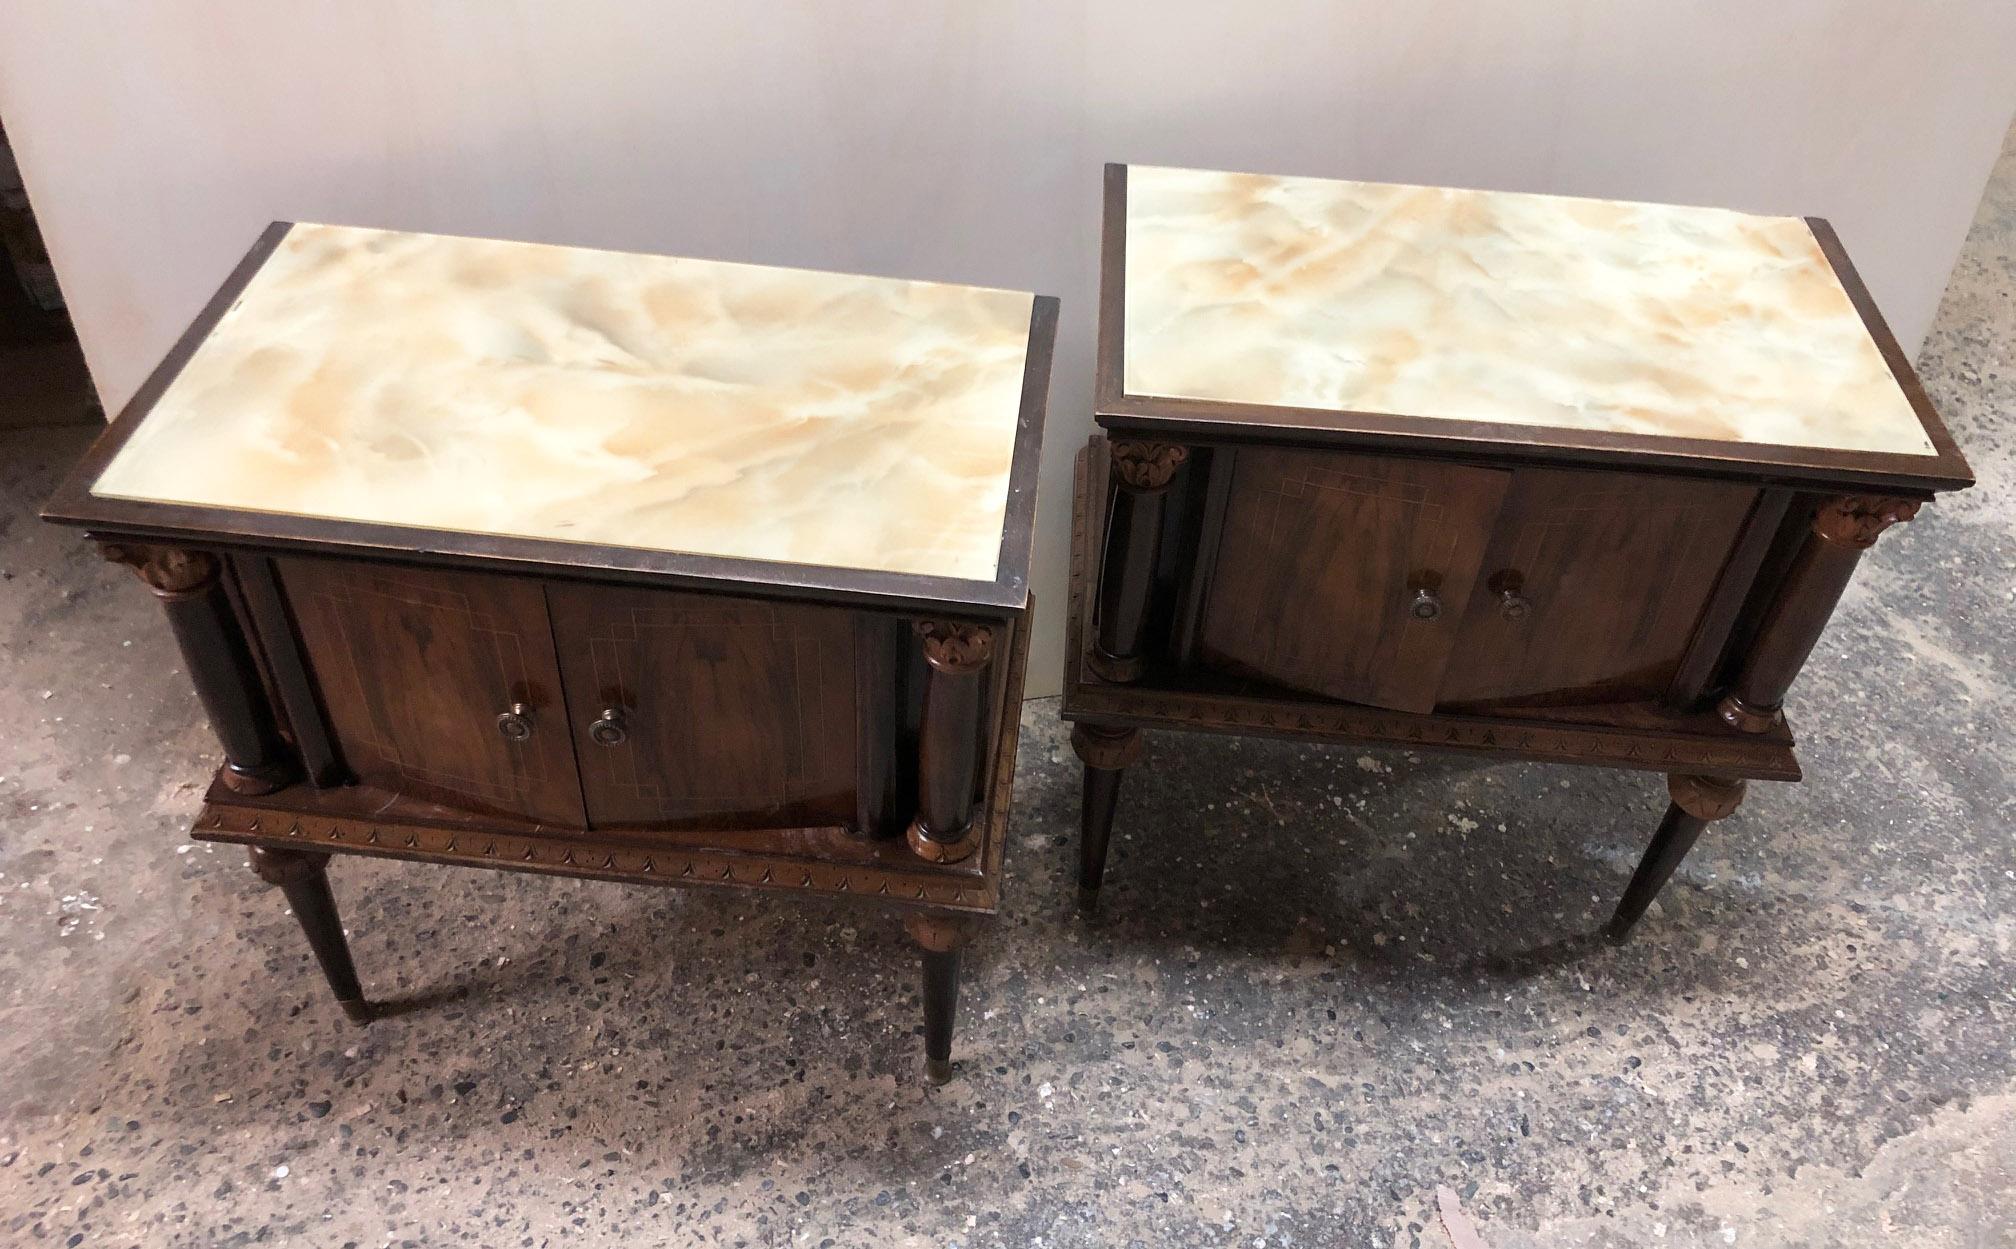 Pair of 1940s Italian nightstands in natural walnut with glass top and marbled paper
Milanese production.
 
To find out the cost of transport to USA etc write a message indicating the delivery city.